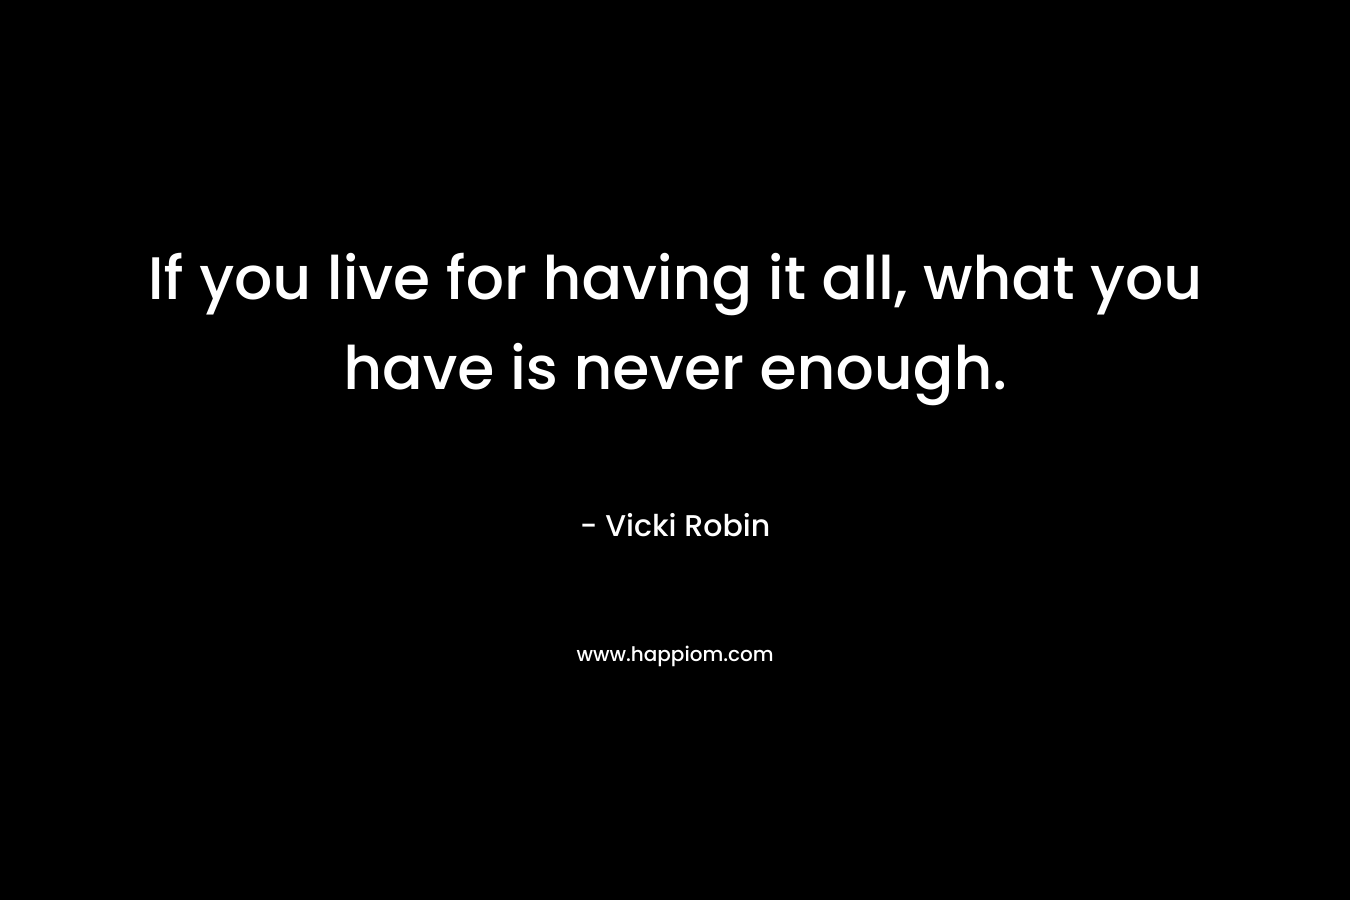 If you live for having it all, what you have is never enough. – Vicki Robin